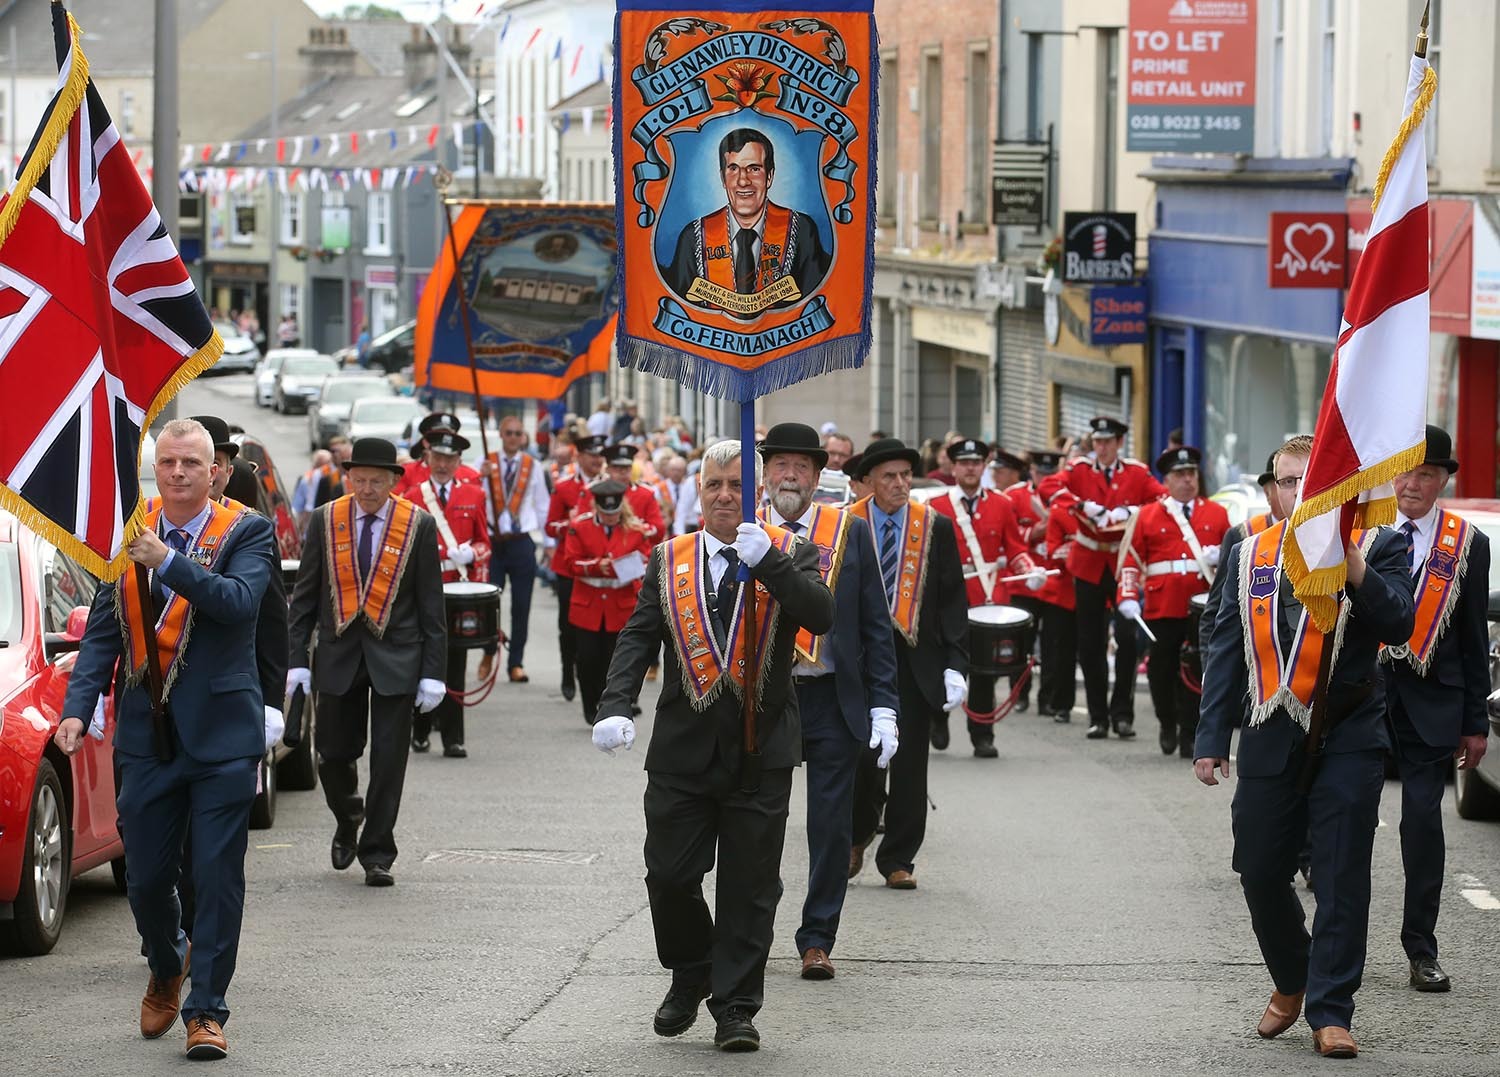 Twelfth of July Fermanagh: Large crowds attend parades across county